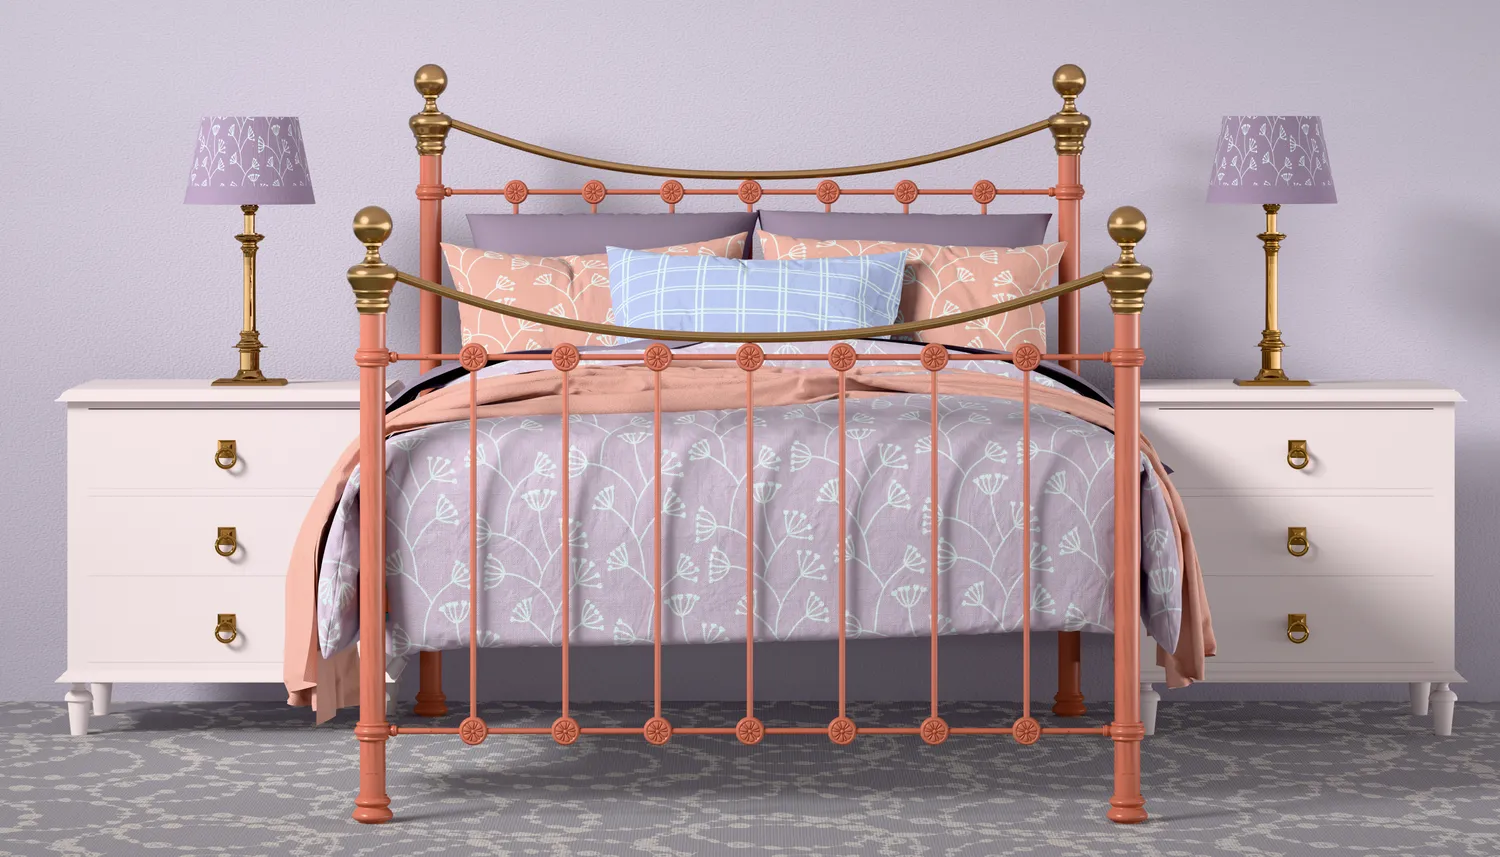 Metal beds and iron bed frames by The Original Bed Co